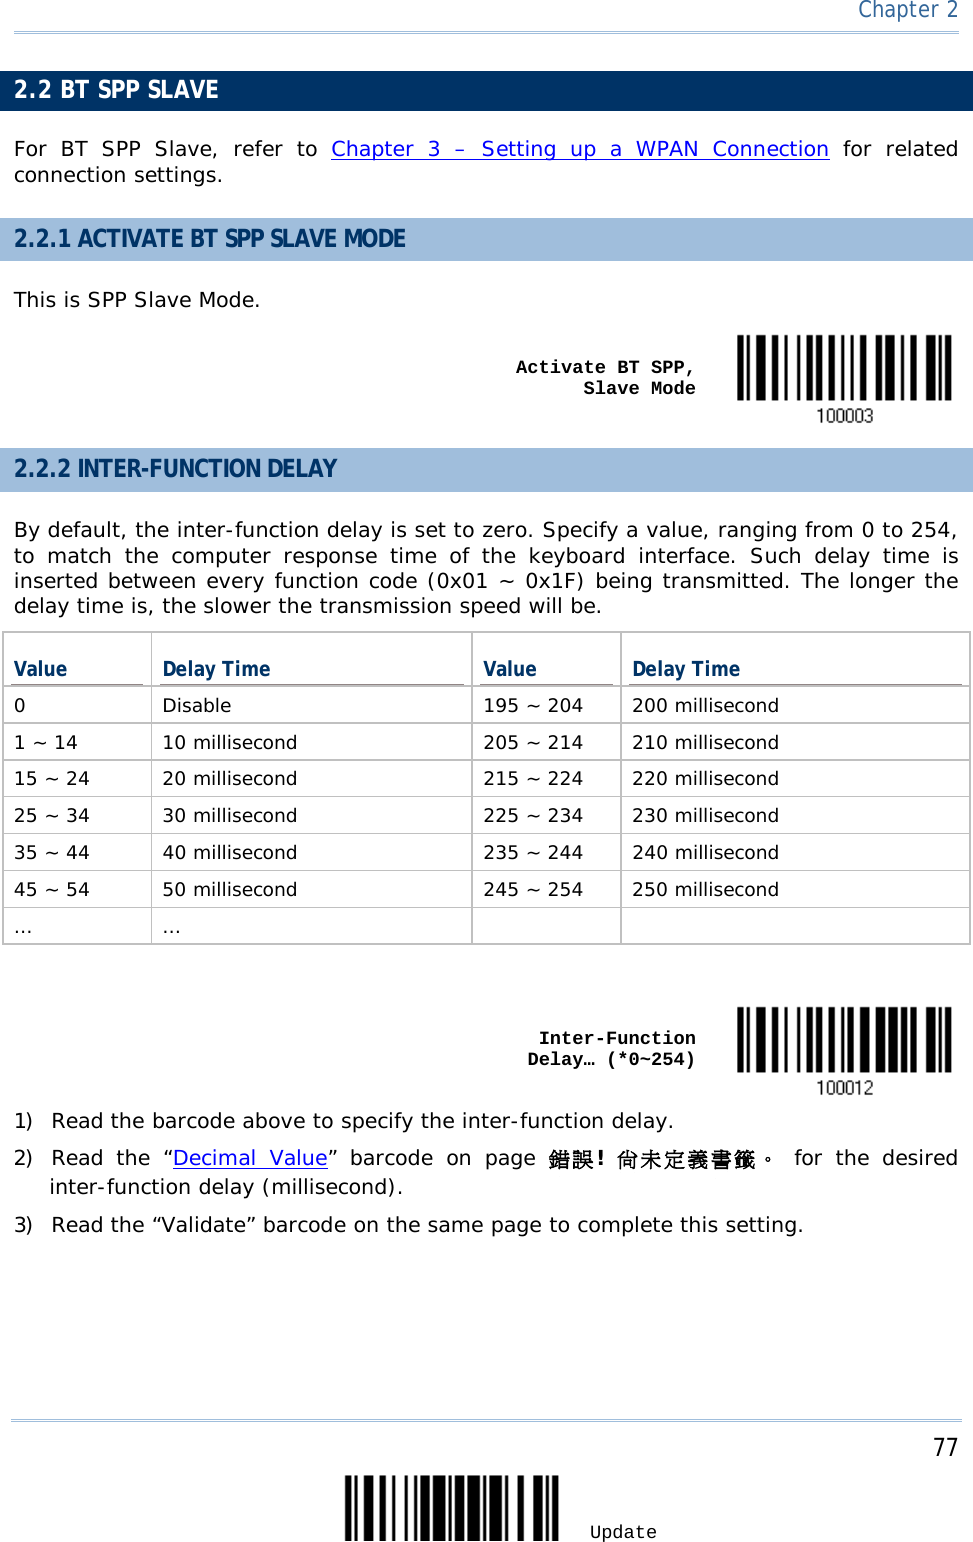     77 Update  Chapter 2    2.2 BT SPP SLAVE For BT SPP Slave,  refer to Chapter 3 –  Setting up a WPAN Connection for related connection settings. 2.2.1 ACTIVATE BT SPP SLAVE MODE This is SPP Slave Mode.      Activate BT SPP, Slave Mode  2.2.2 INTER-FUNCTION DELAY By default, the inter-function delay is set to zero. Specify a value, ranging from 0 to 254, to match the computer response time of the keyboard interface. Such delay time is inserted between every function code (0x01 ~ 0x1F) being transmitted. The longer the delay time is, the slower the transmission speed will be. Value Delay Time Value Delay Time 0  Disable 195 ~ 204 200 millisecond 1 ~ 14 10 millisecond 205 ~ 214 210 millisecond 15 ~ 24 20 millisecond 215 ~ 224 220 millisecond 25 ~ 34 30 millisecond 225 ~ 234 230 millisecond 35 ~ 44 40 millisecond 235 ~ 244 240 millisecond 45 ~ 54 50 millisecond 245 ~ 254 250 millisecond …  …         Inter-Function Delay… (*0~254)  1) Read the barcode above to specify the inter-function delay.       2) Read the “Decimal Value”  barcode on page 錯誤!  尚未定義書籤。 for the desired inter-function delay (millisecond).  3) Read the “Validate” barcode on the same page to complete this setting. 